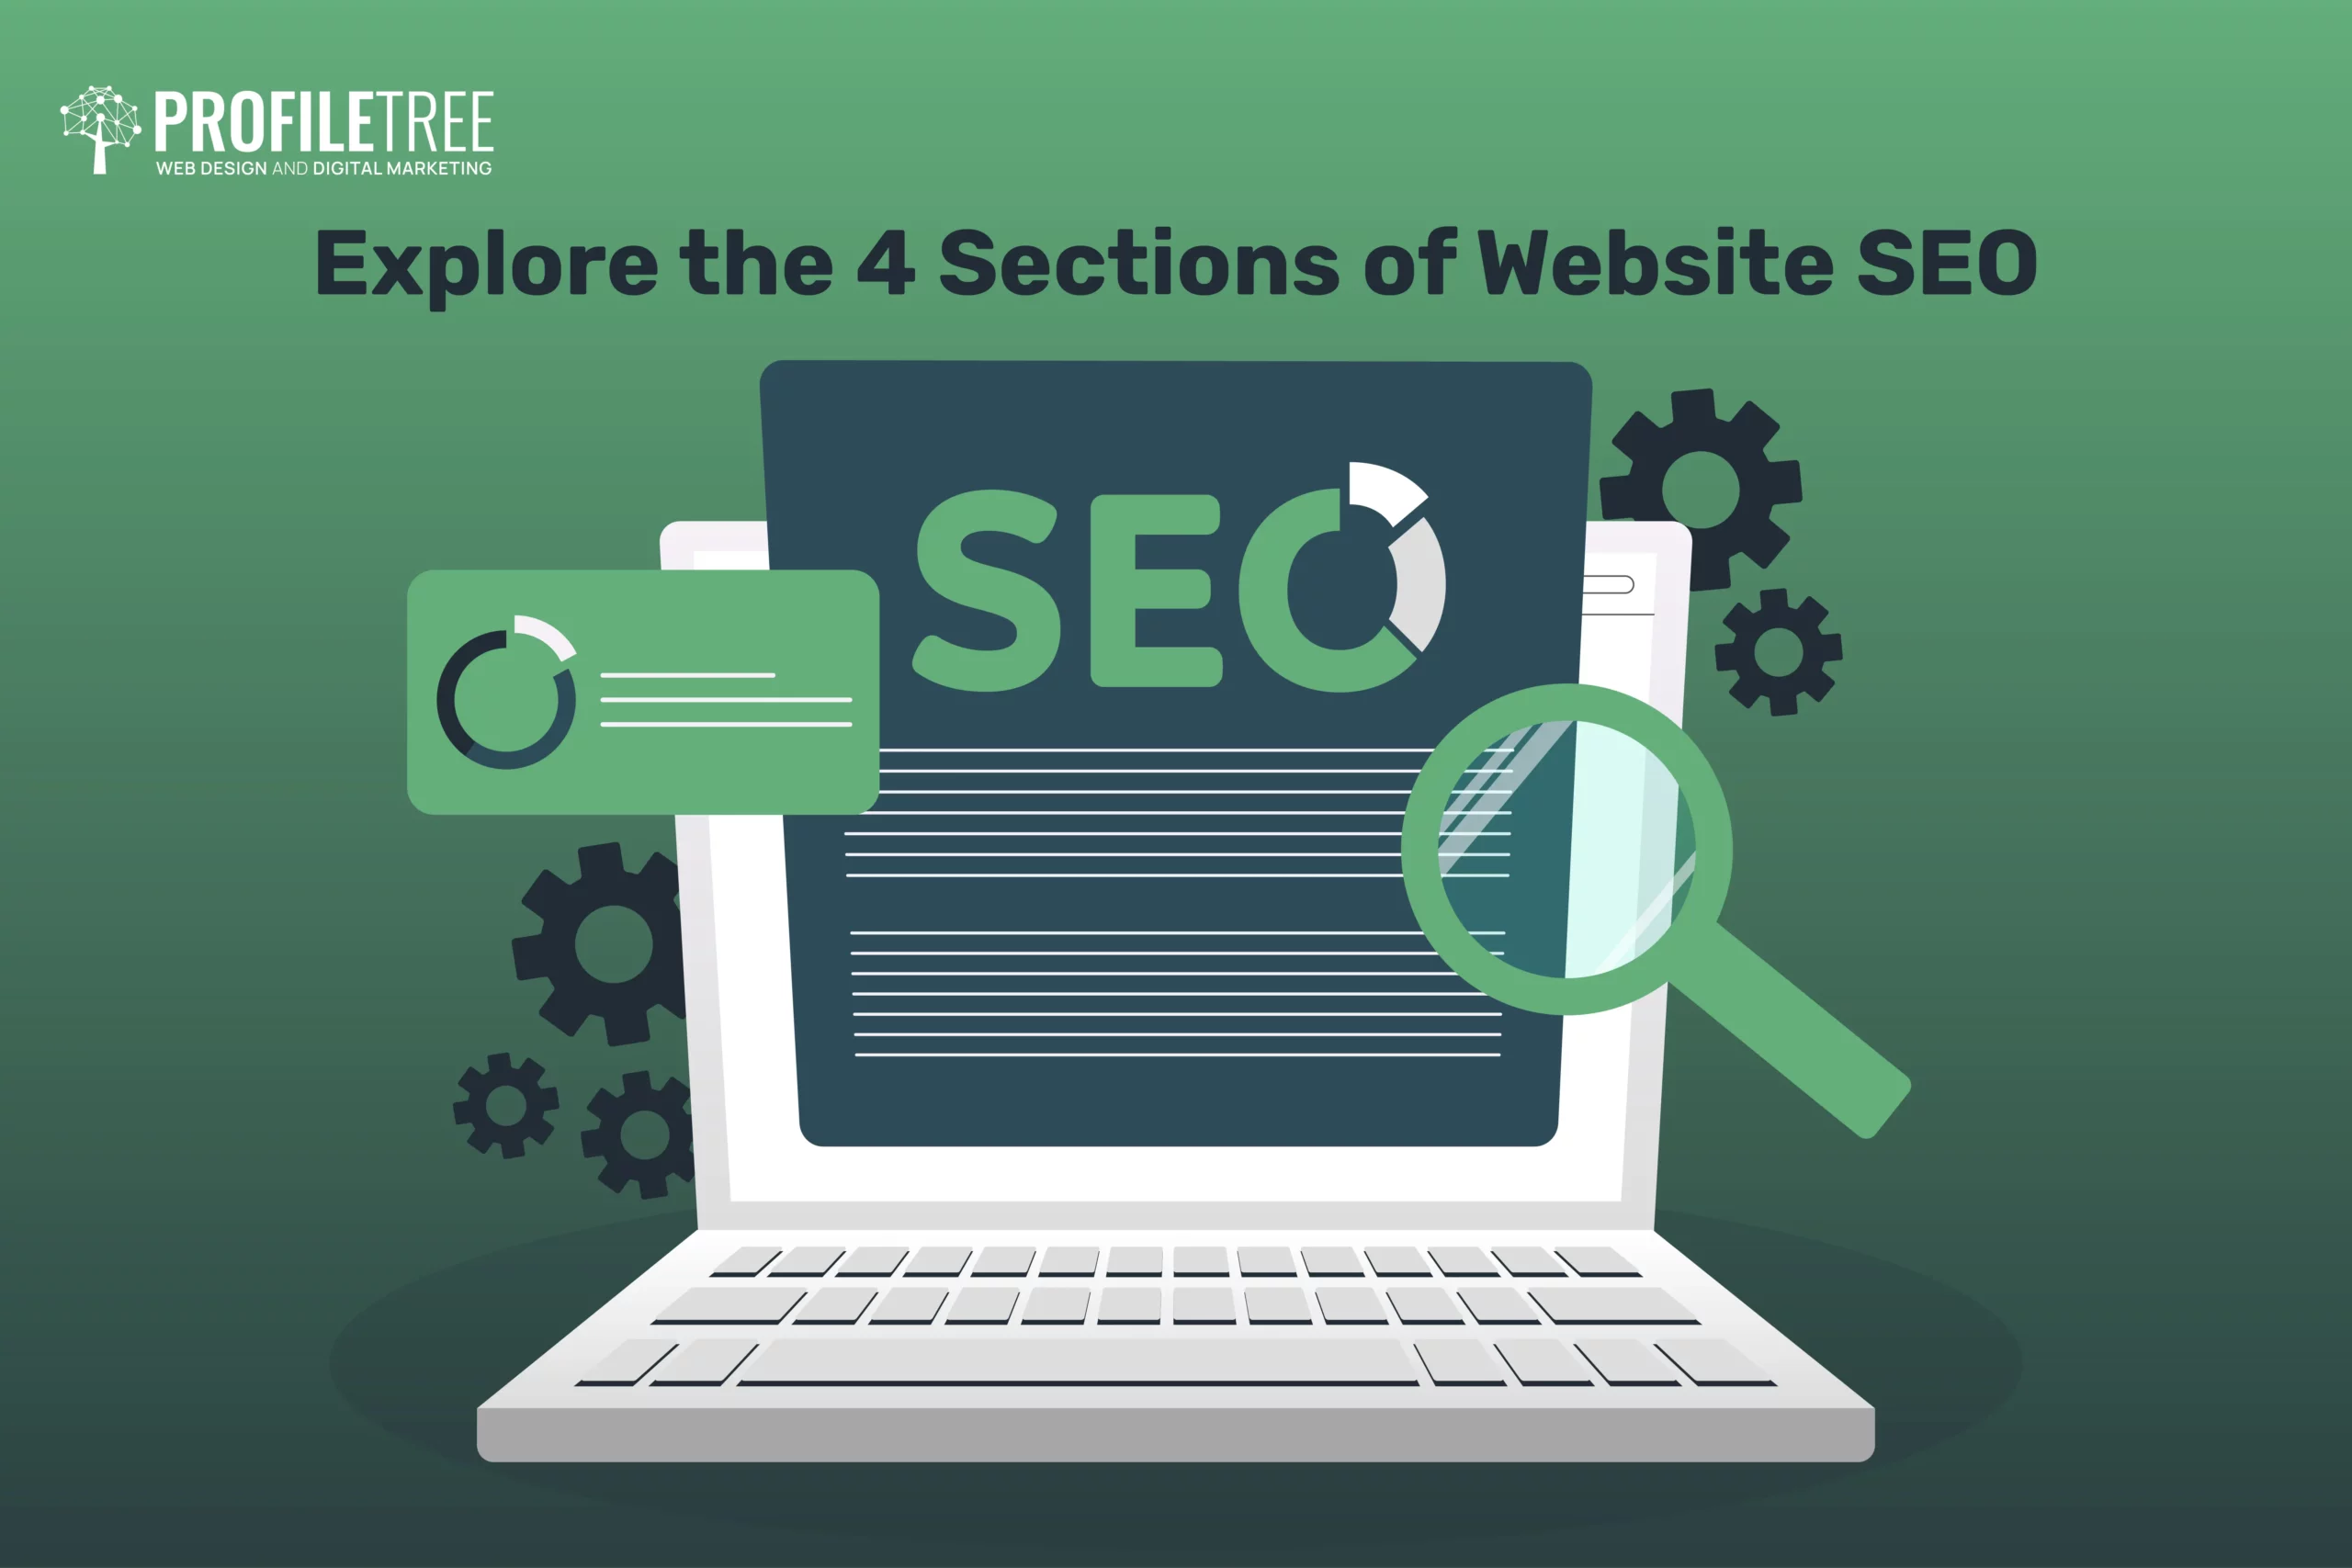 SEO / Sections of Website SEO